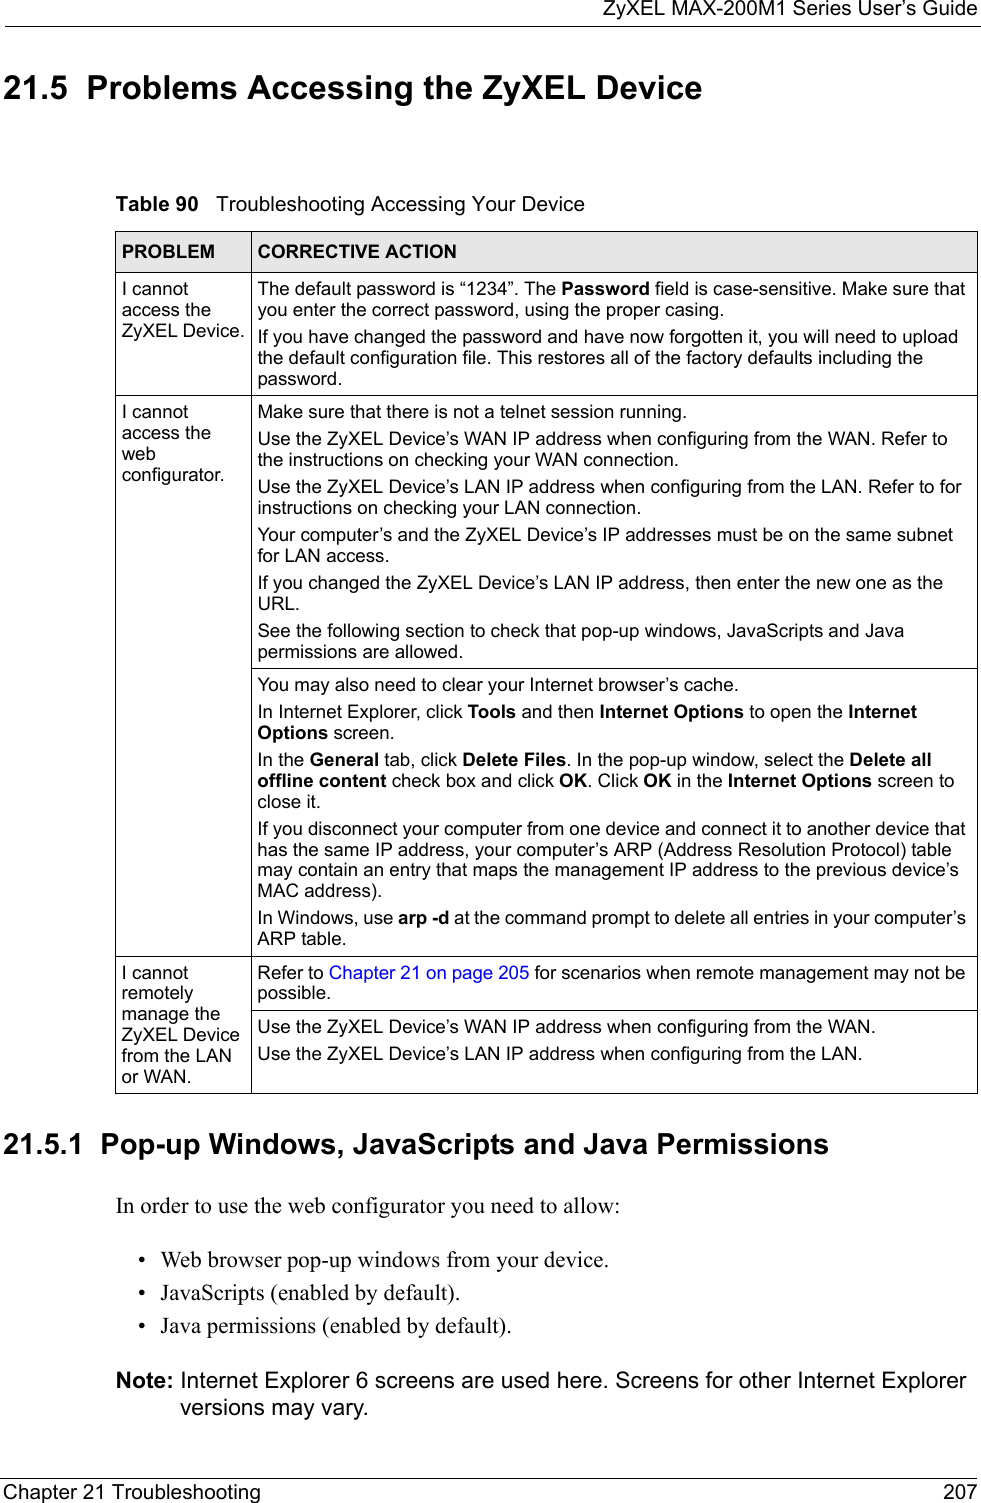 ZyXEL MAX-200M1 Series User’s GuideChapter 21 Troubleshooting 20721.5  Problems Accessing the ZyXEL Device21.5.1  Pop-up Windows, JavaScripts and Java Permissions In order to use the web configurator you need to allow:• Web browser pop-up windows from your device.• JavaScripts (enabled by default).• Java permissions (enabled by default).Note: Internet Explorer 6 screens are used here. Screens for other Internet Explorer versions may vary.Table 90   Troubleshooting Accessing Your DevicePROBLEM CORRECTIVE ACTIONI cannot access the ZyXEL Device.The default password is “1234”. The Password field is case-sensitive. Make sure that you enter the correct password, using the proper casing.If you have changed the password and have now forgotten it, you will need to upload the default configuration file. This restores all of the factory defaults including the password.I cannot access the web configurator.Make sure that there is not a telnet session running.Use the ZyXEL Device’s WAN IP address when configuring from the WAN. Refer to the instructions on checking your WAN connection.Use the ZyXEL Device’s LAN IP address when configuring from the LAN. Refer to for instructions on checking your LAN connection.Your computer’s and the ZyXEL Device’s IP addresses must be on the same subnet for LAN access.If you changed the ZyXEL Device’s LAN IP address, then enter the new one as the URL.See the following section to check that pop-up windows, JavaScripts and Java permissions are allowed.You may also need to clear your Internet browser’s cache.In Internet Explorer, click Tools and then Internet Options to open the Internet Options screen. In the General tab, click Delete Files. In the pop-up window, select the Delete all offline content check box and click OK. Click OK in the Internet Options screen to close it.If you disconnect your computer from one device and connect it to another device that has the same IP address, your computer’s ARP (Address Resolution Protocol) table may contain an entry that maps the management IP address to the previous device’s MAC address). In Windows, use arp -d at the command prompt to delete all entries in your computer’s ARP table.I cannot remotely manage the ZyXEL Device from the LAN or WAN.Refer to Chapter 21 on page 205 for scenarios when remote management may not be possible. Use the ZyXEL Device’s WAN IP address when configuring from the WAN. Use the ZyXEL Device’s LAN IP address when configuring from the LAN.